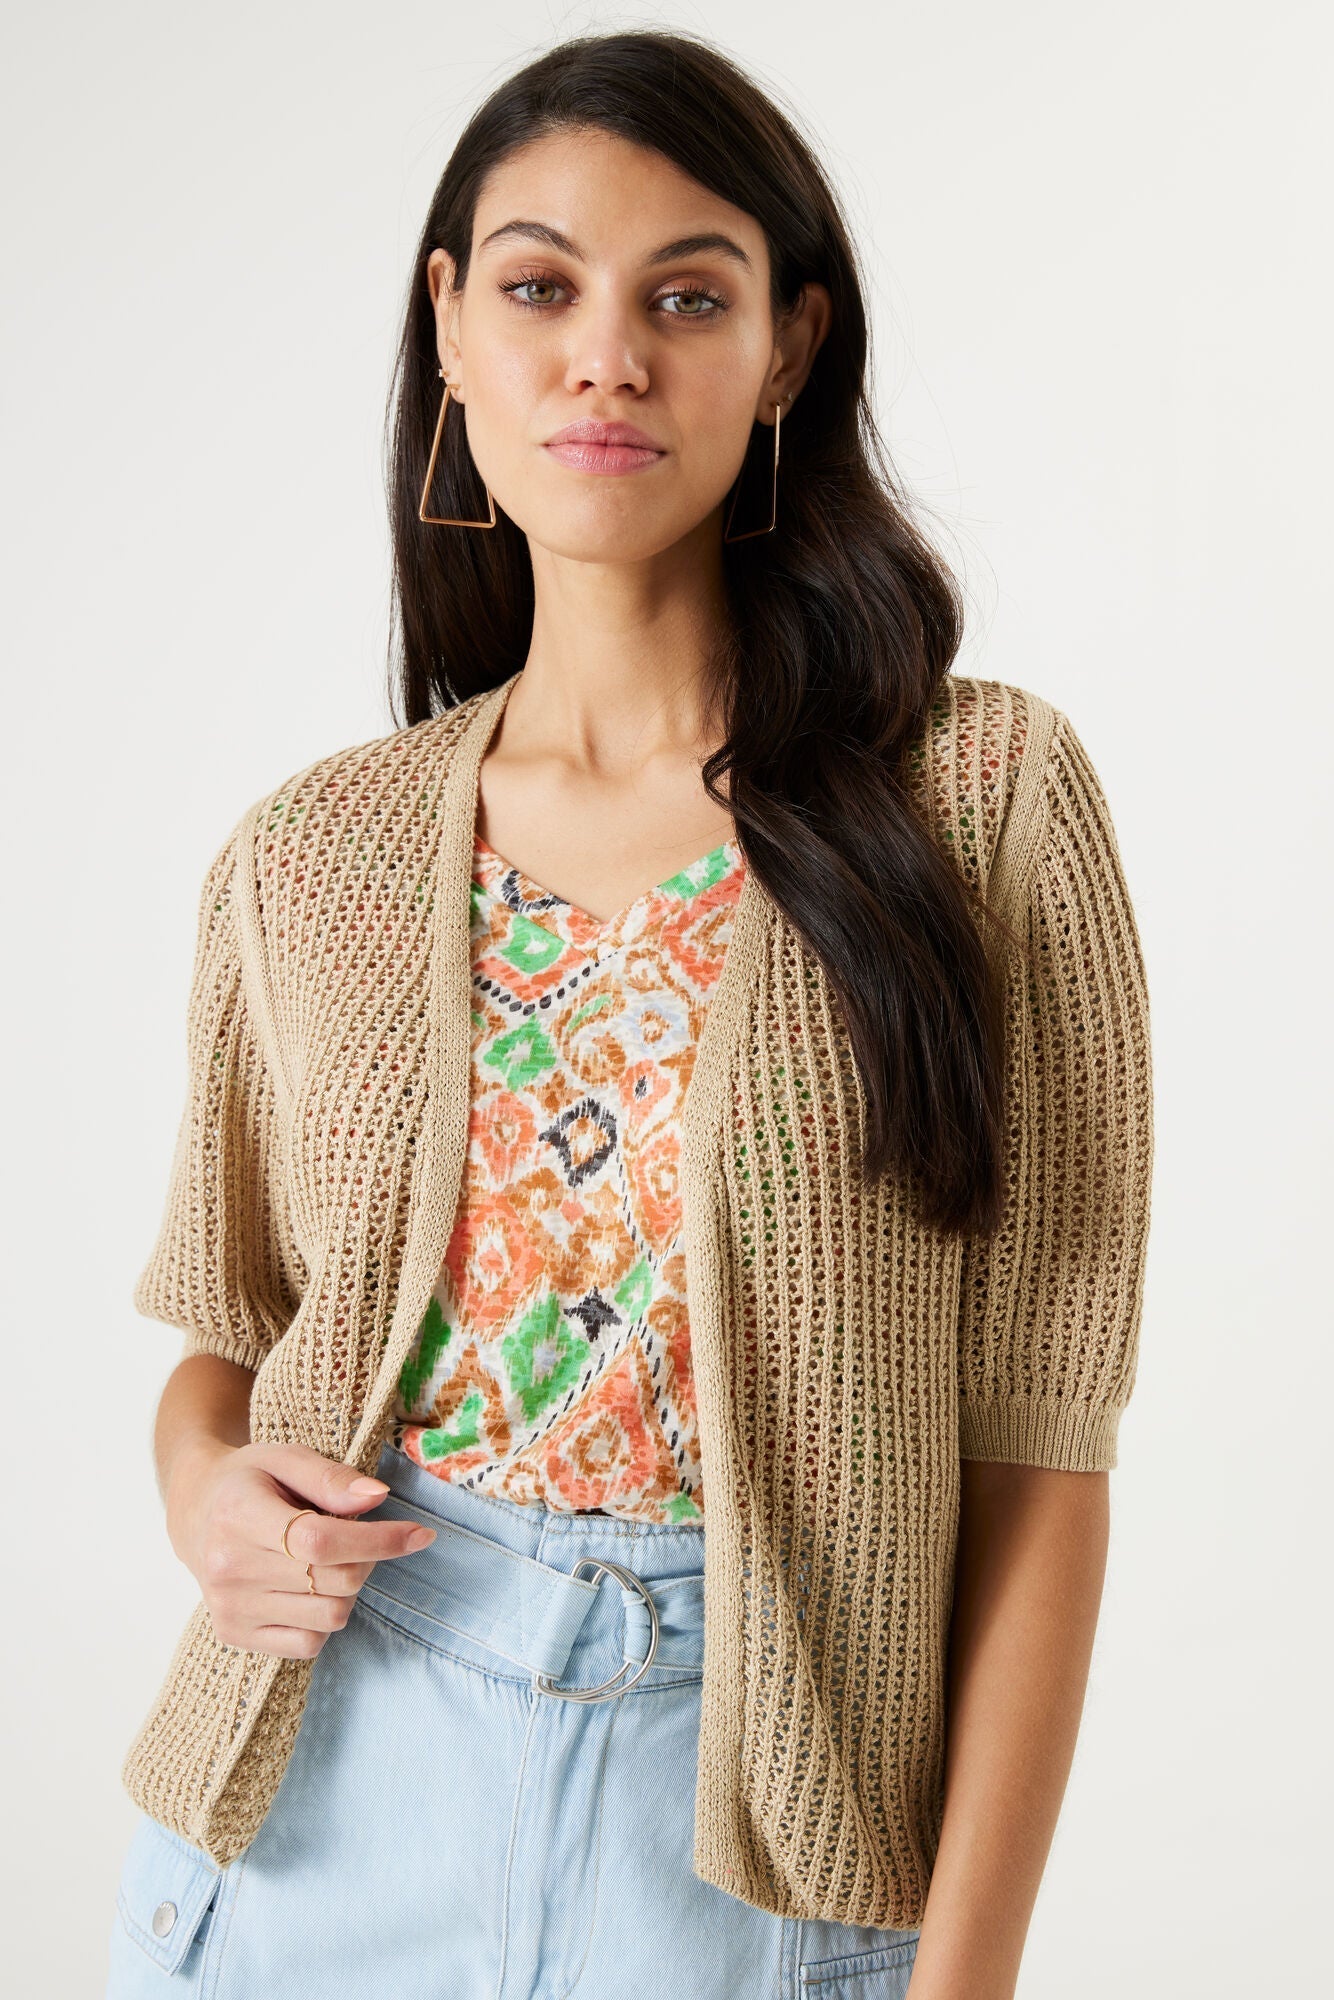 Garcia (P40242) Women's Elbow Sleeve Open Knit Cardigan, with Open Front in Safari Brown